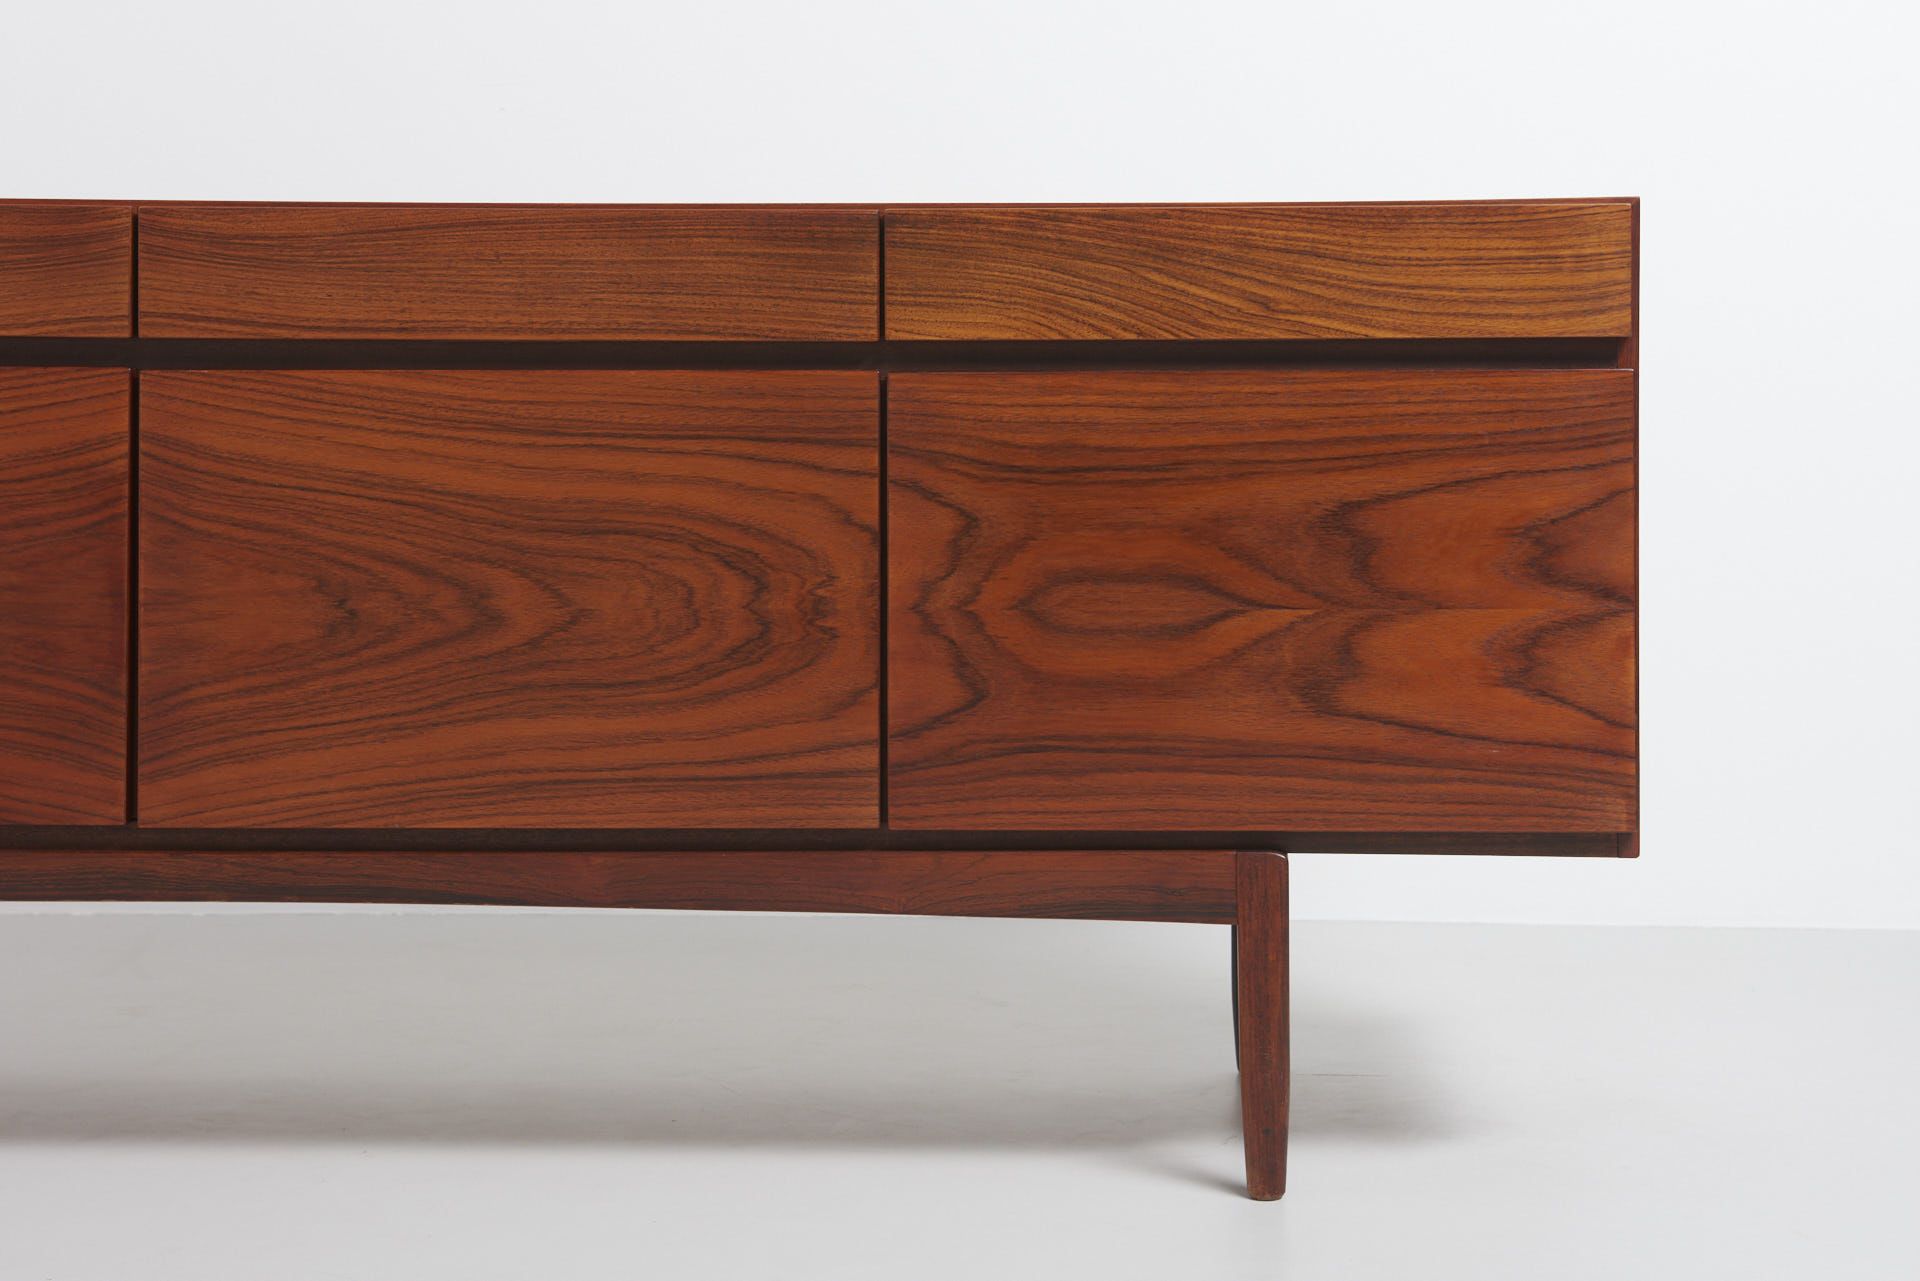 Excellent Sideboard Design Fa 66 Ib Kofod Larsen Modest Intended For Alegre Sideboards (View 3 of 20)